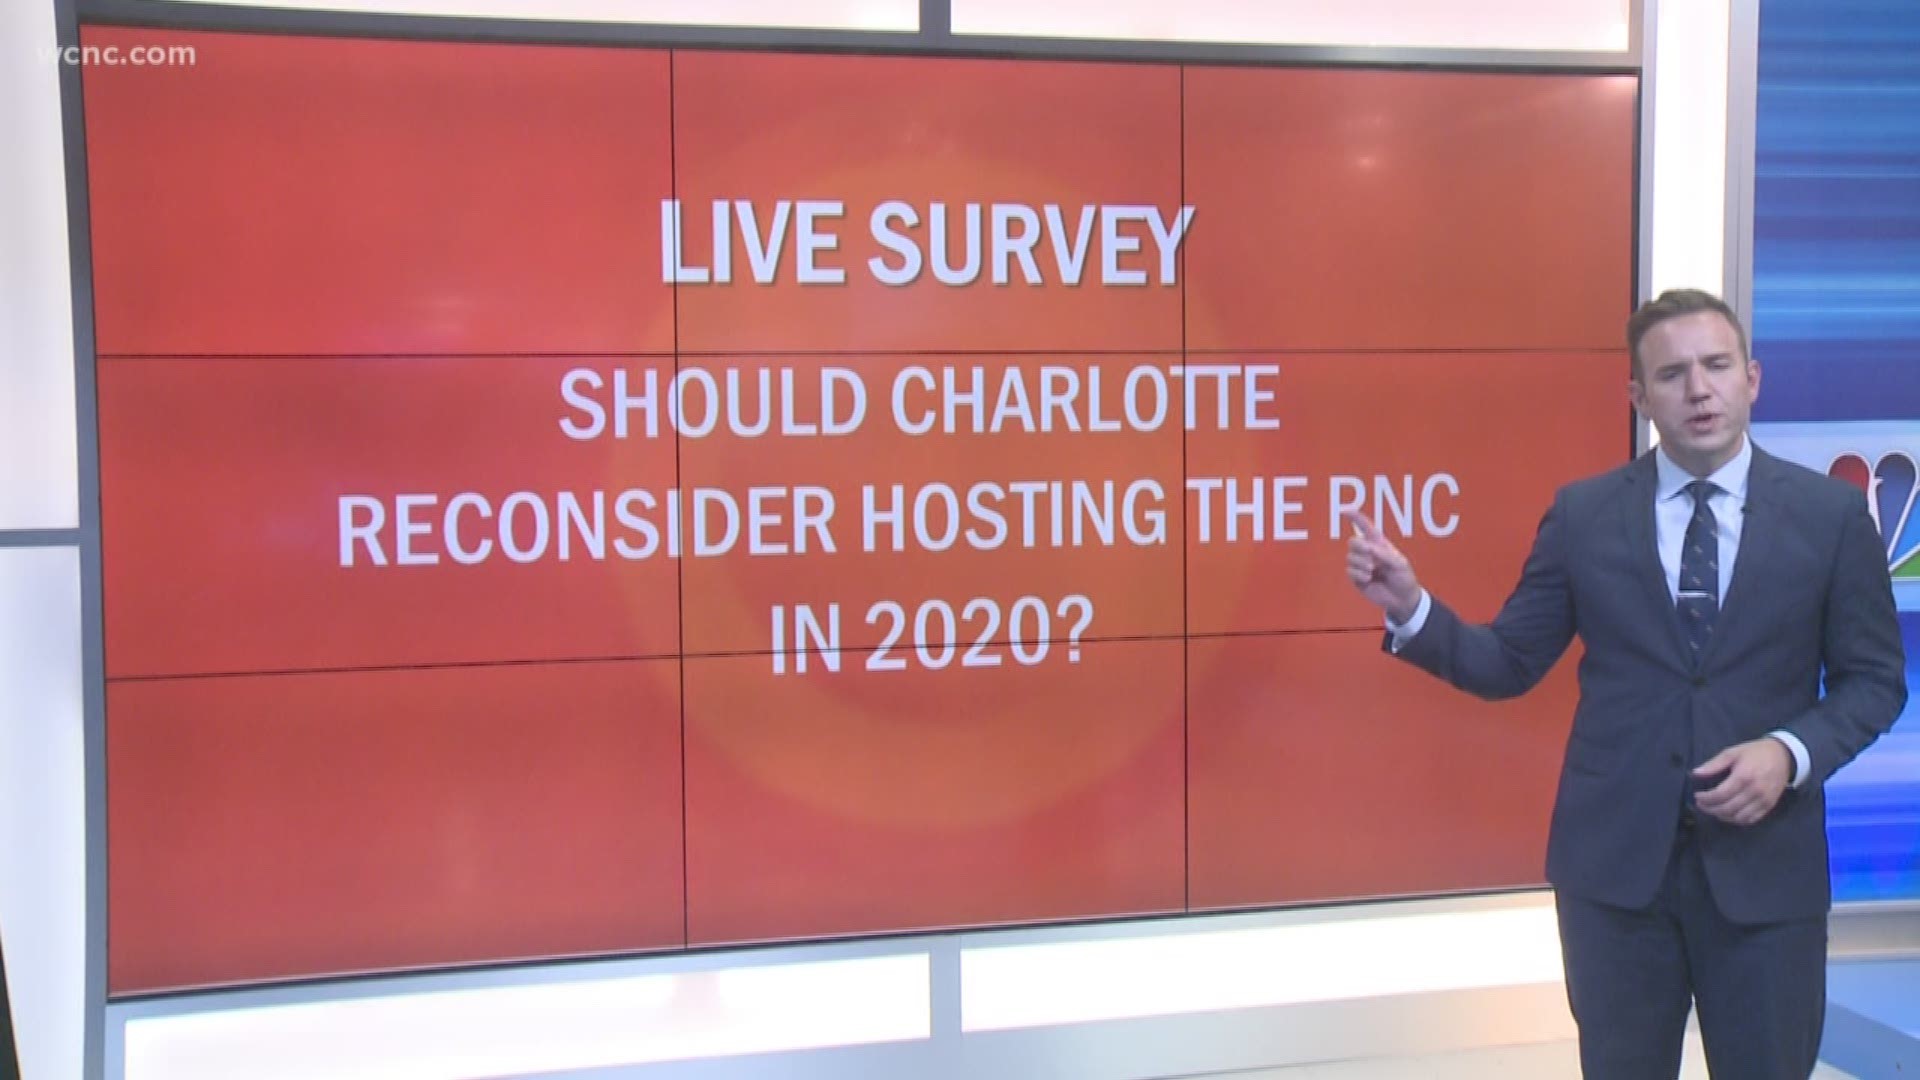 Trending in CLT: Should Charlotte reconsider hosting the RNC in 2020?